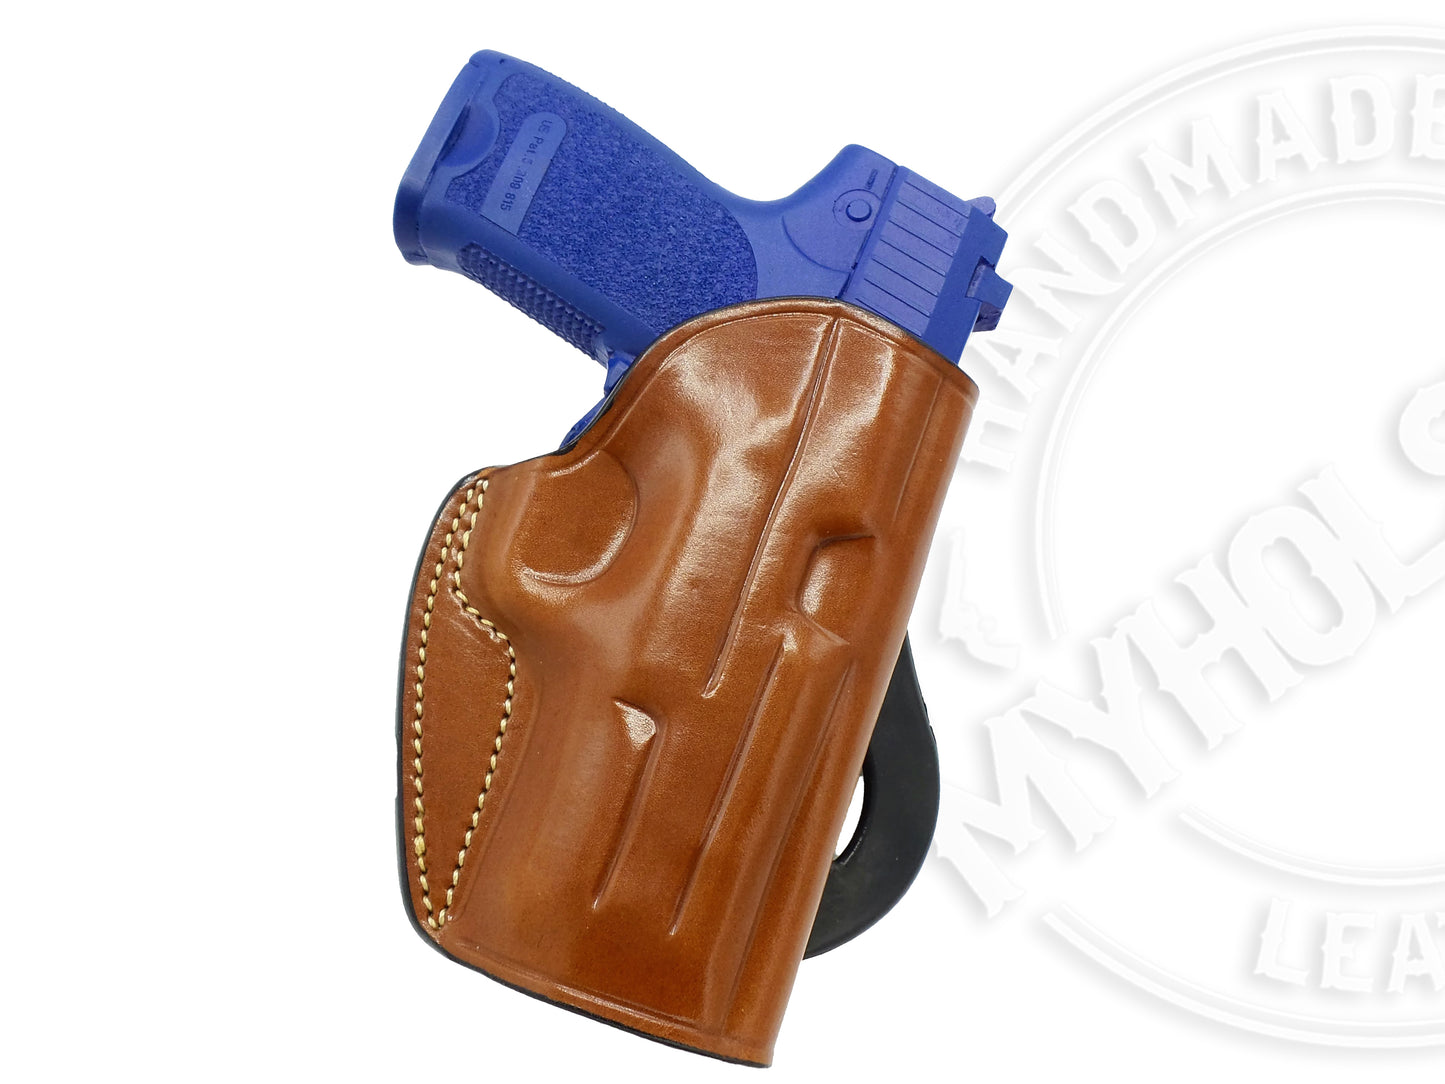 CZ 75 Compact  OWB Quick Draw Right Hand Leather Paddle Holster